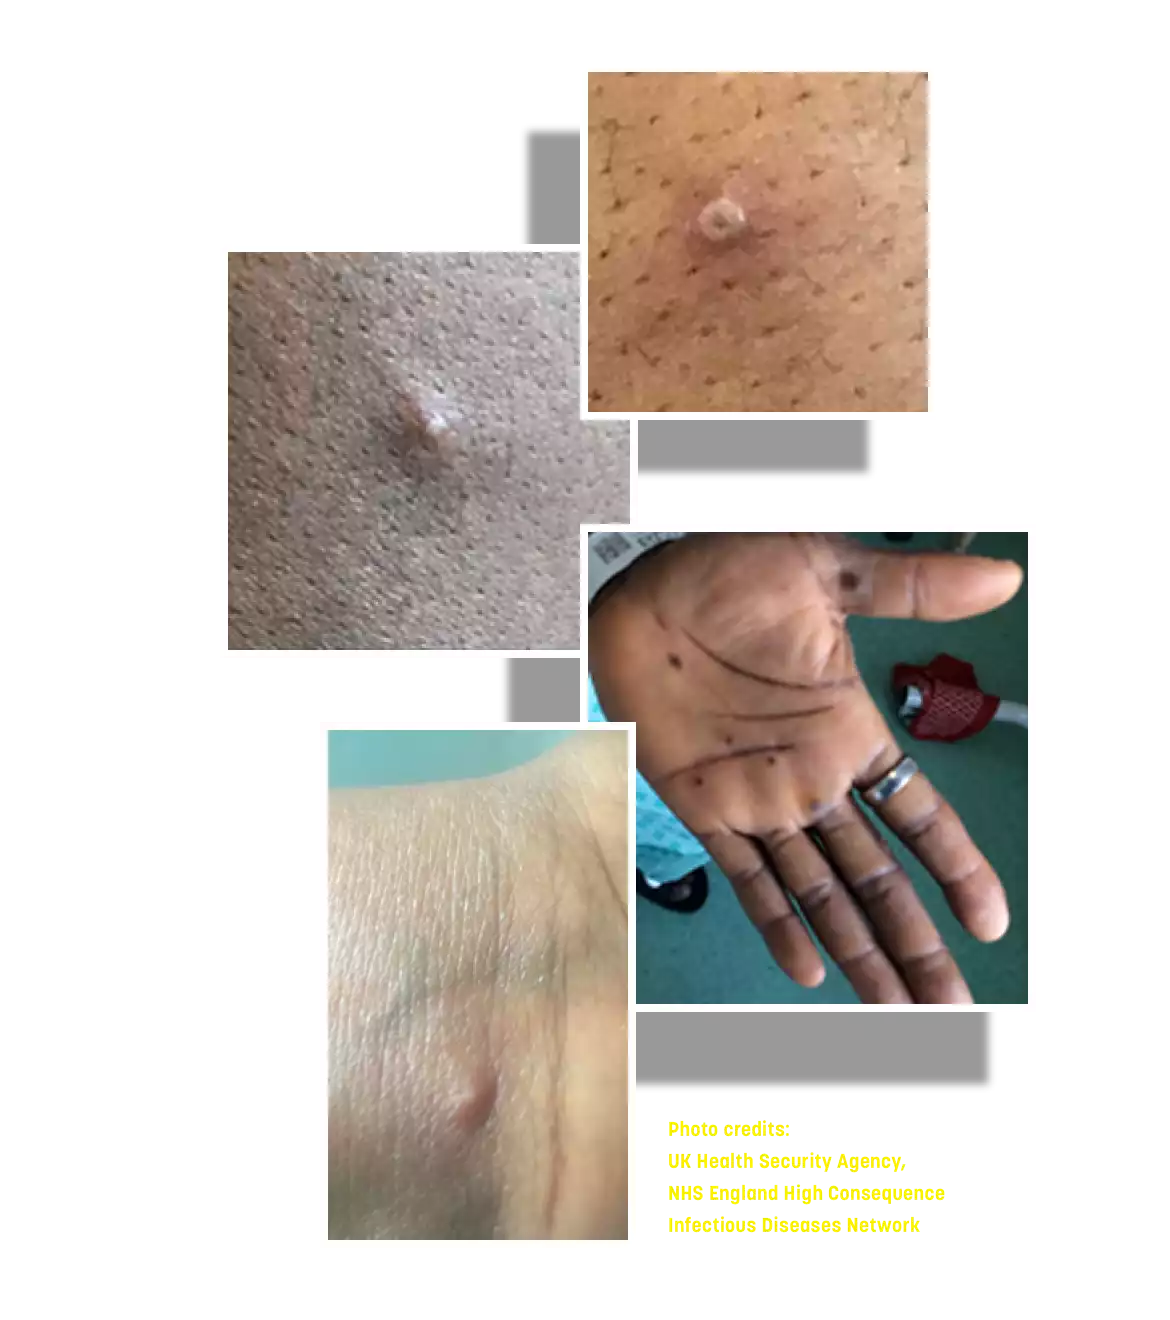 mpox (monkeypox) sores and rashes on a person's skin, around the nipple, and on a hand